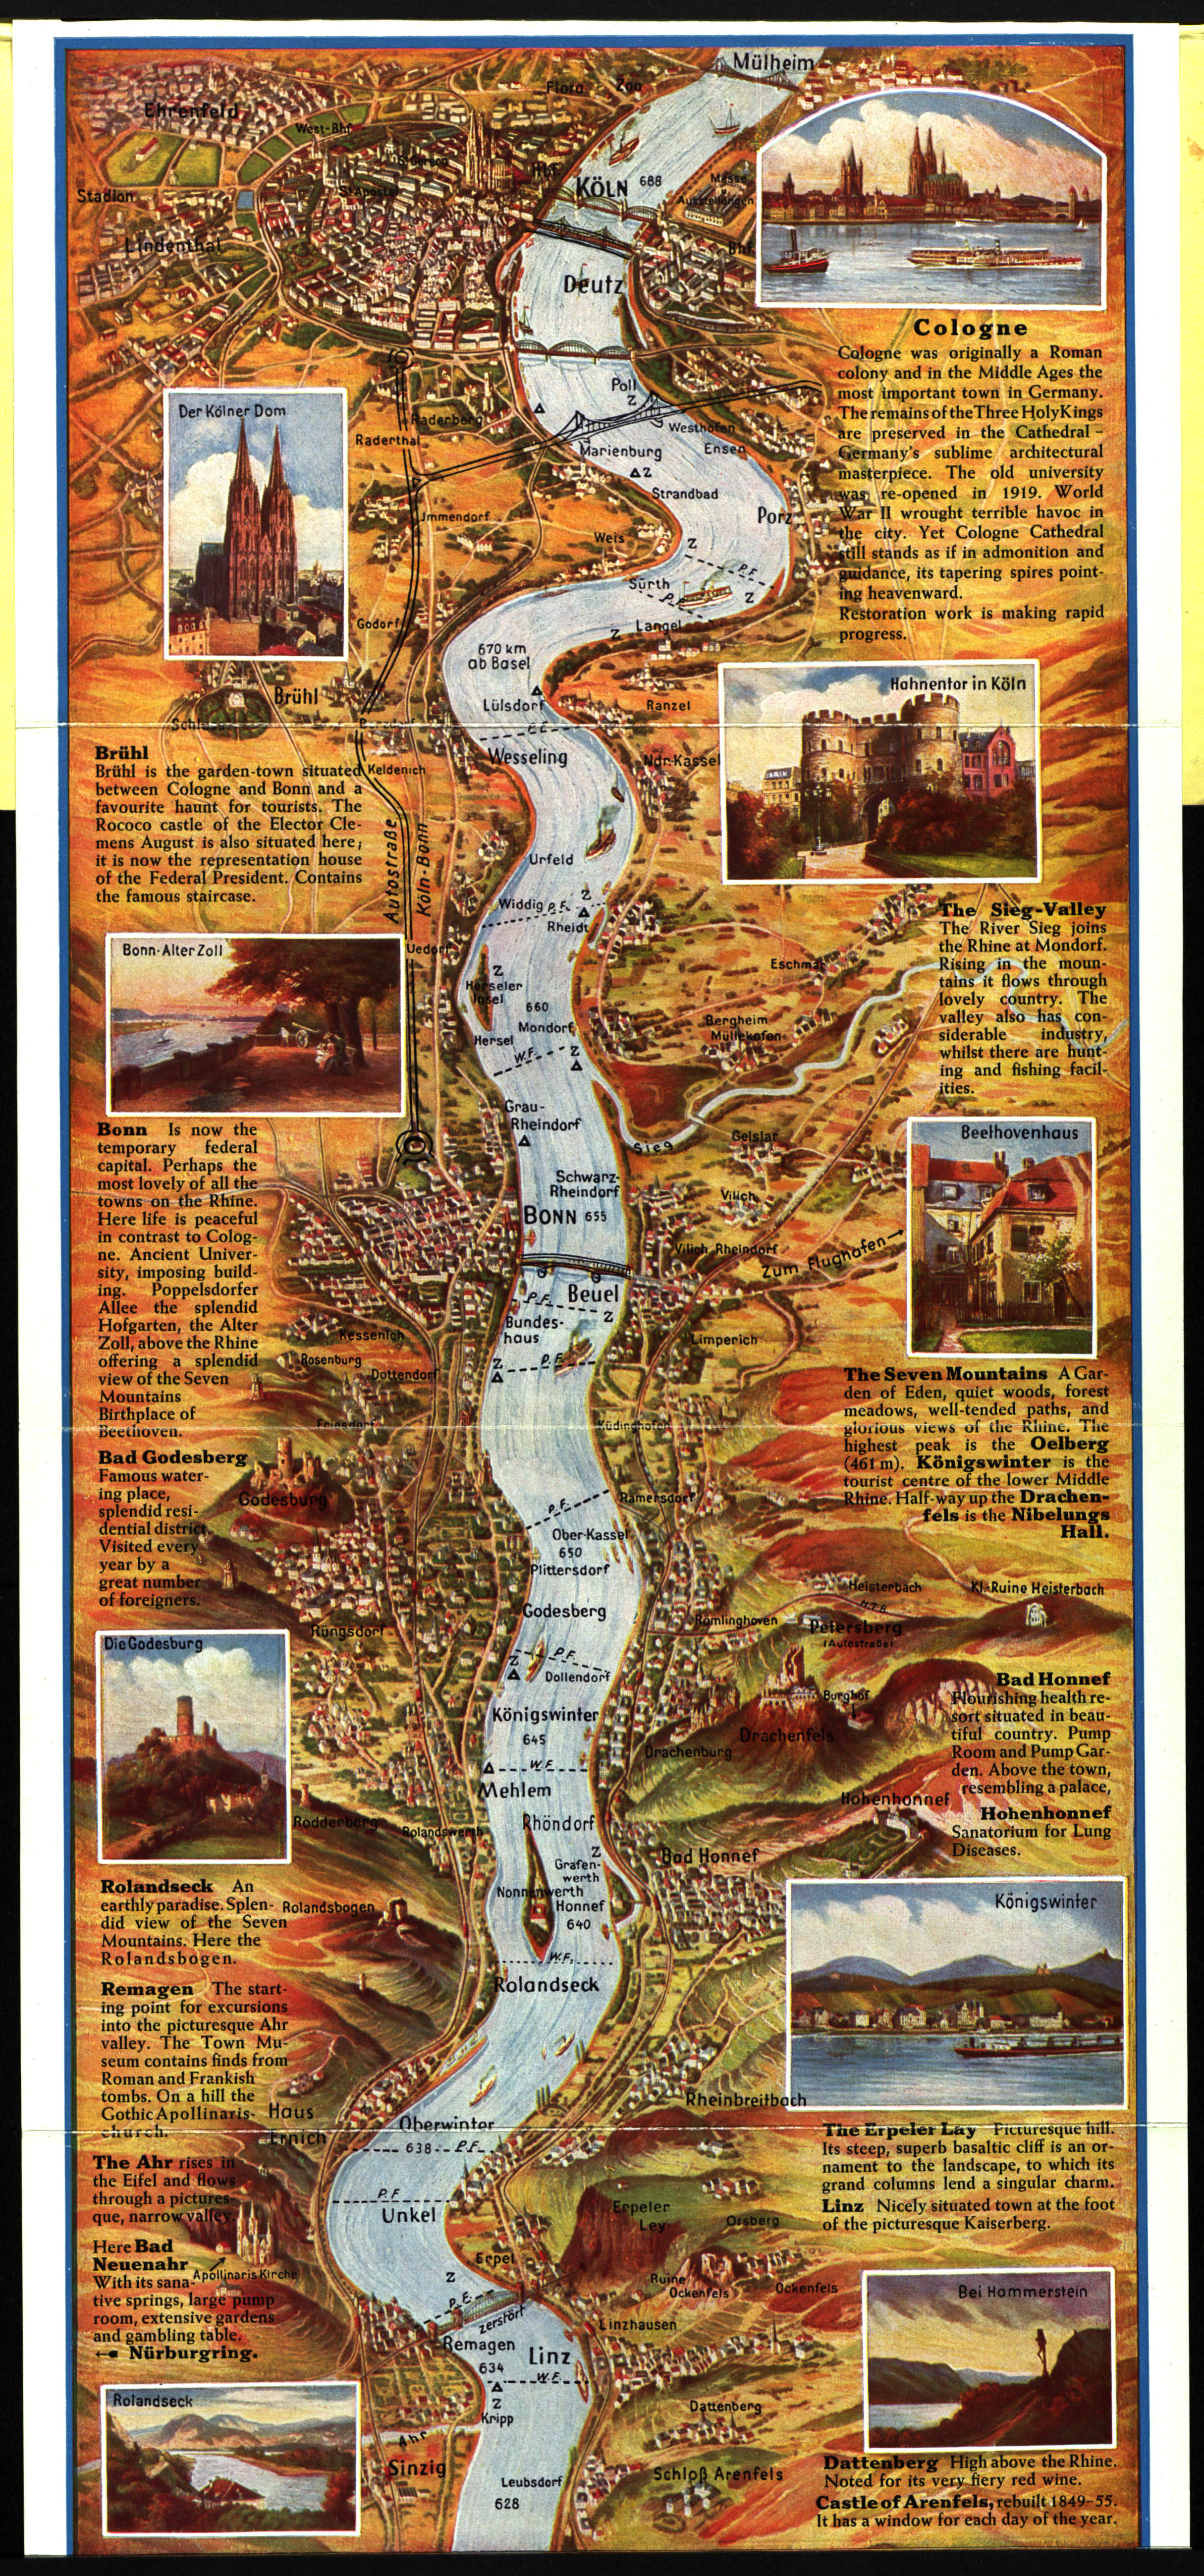 The Course of the Rhine – from Mainz to Cologne – A Relief Panorama. Copyright of this material is retained by the content creators. Michigan State University does not claim to hold any copyrights to these materials